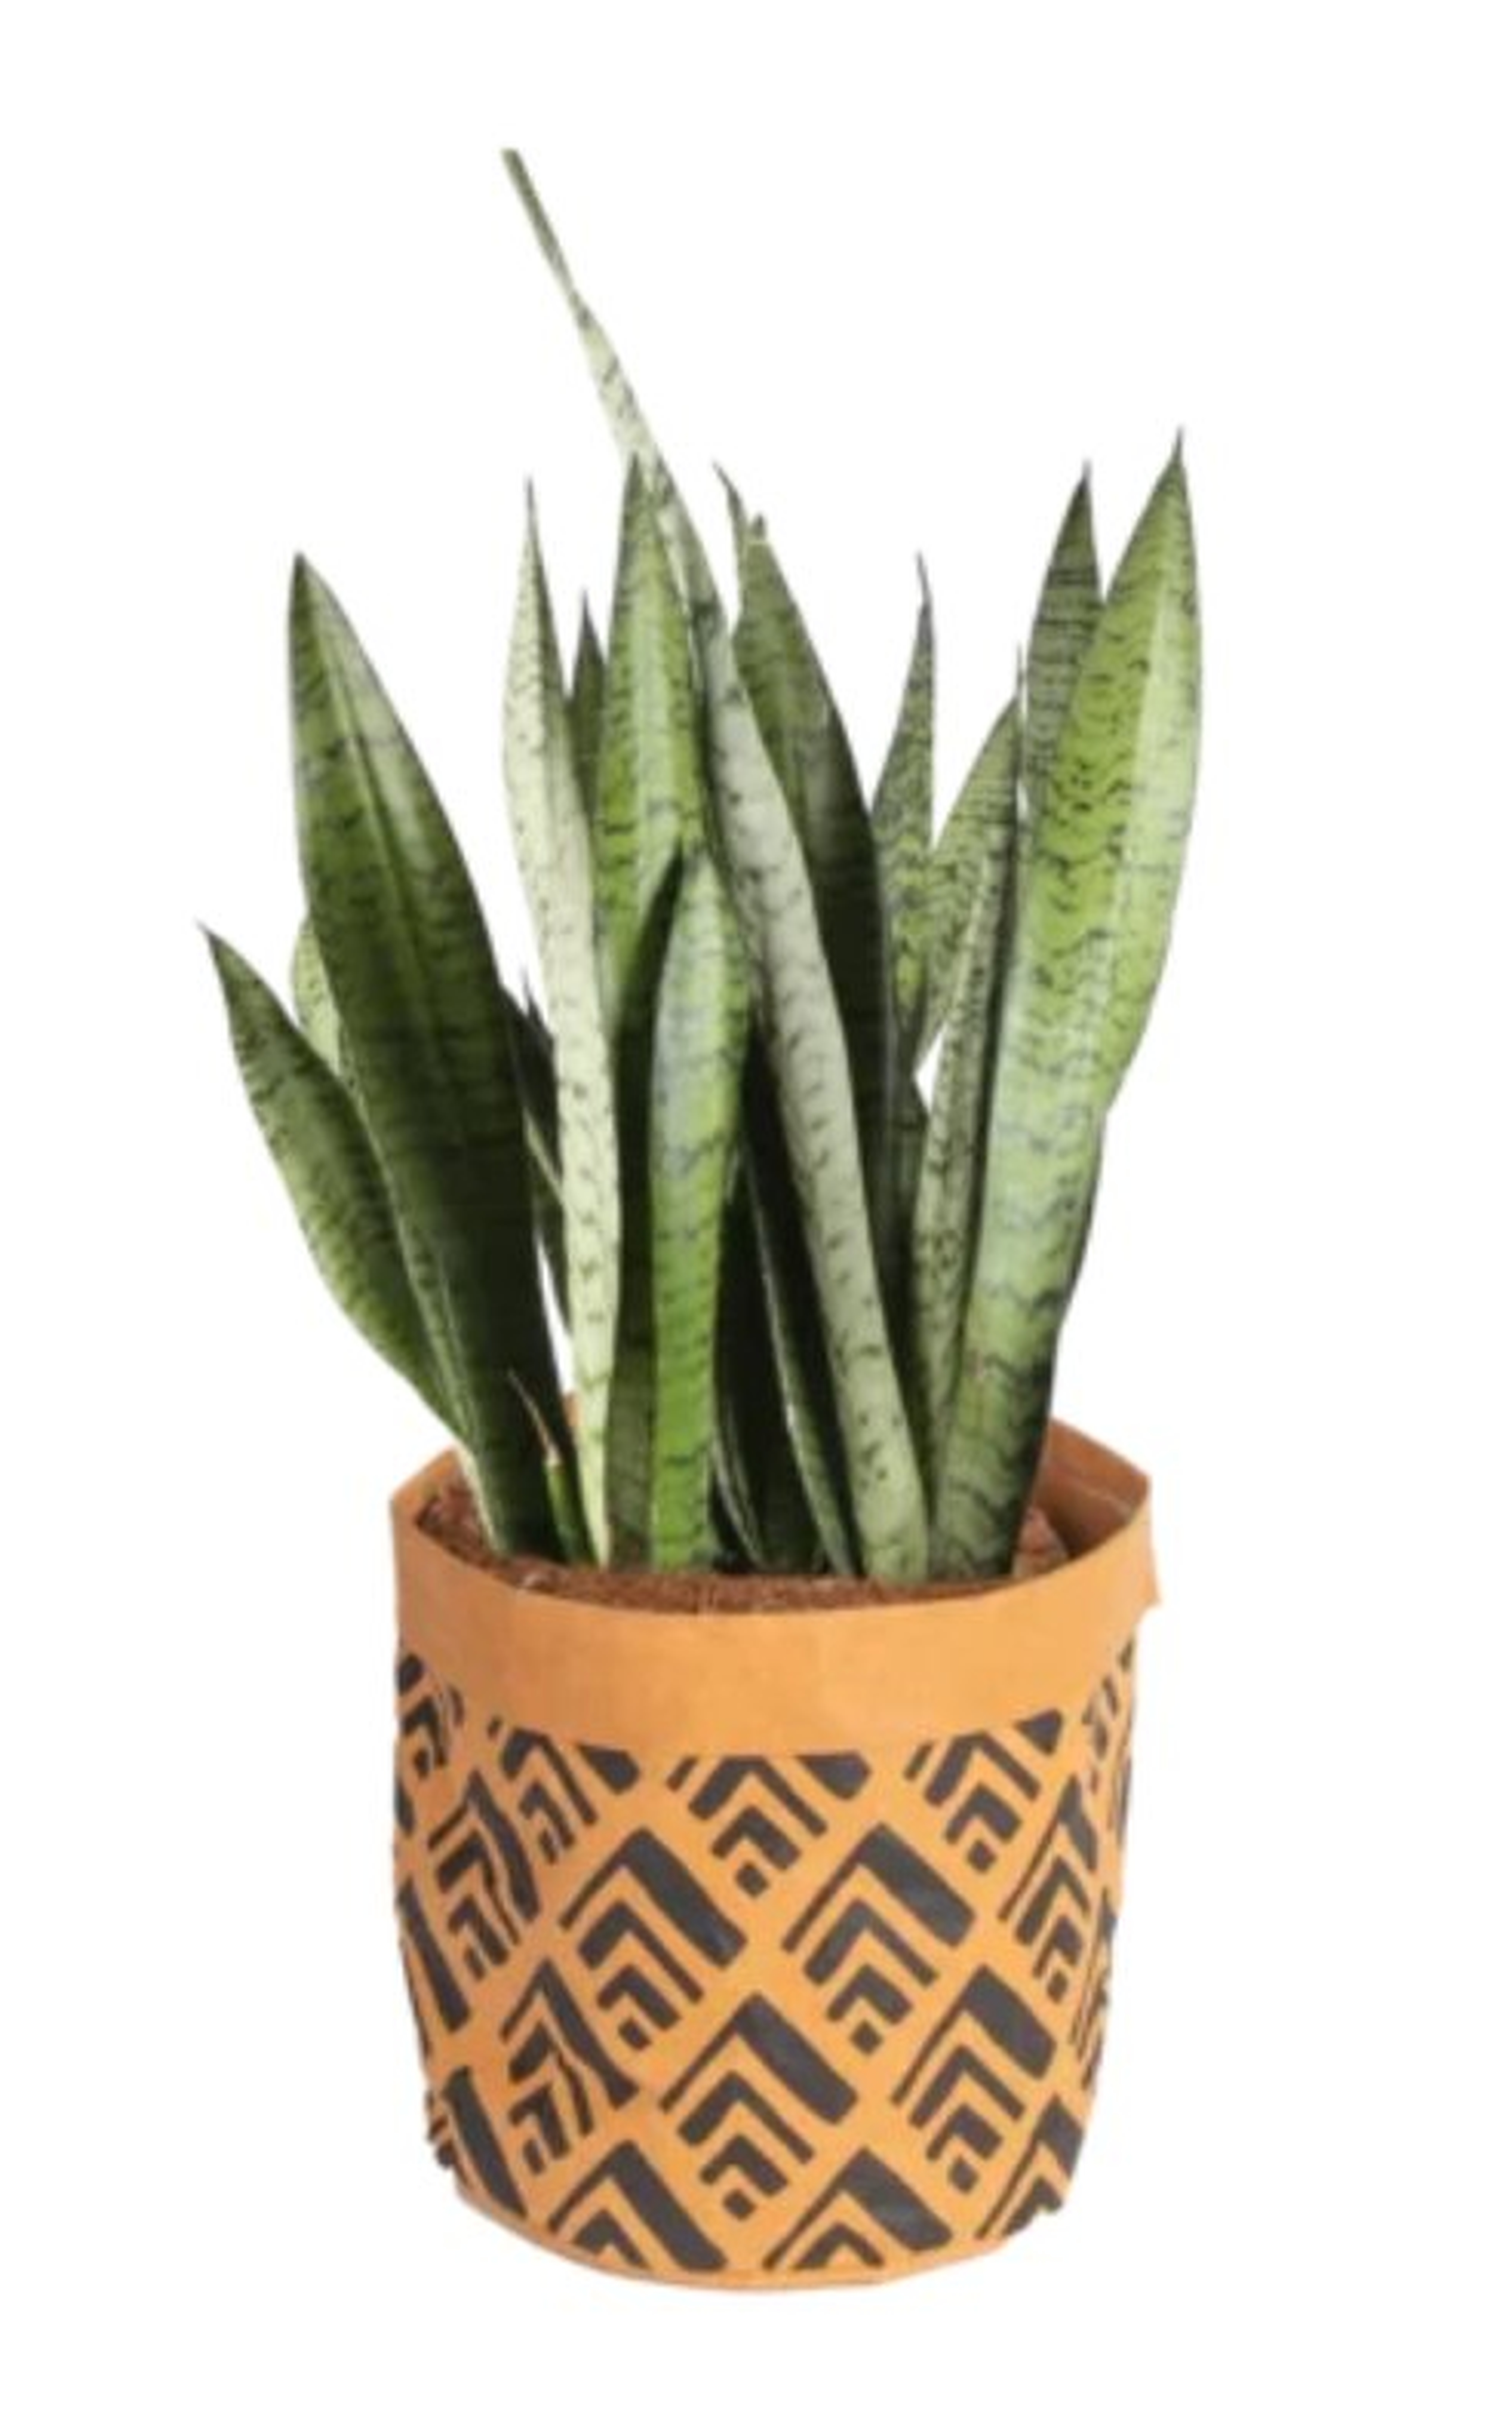 Costa Farms Low Maintenance 24'' Snake Plant Floor Plant in a Wicker / Rattan Basket with Air Purifying Qualities for Outdoor Use - Wayfair